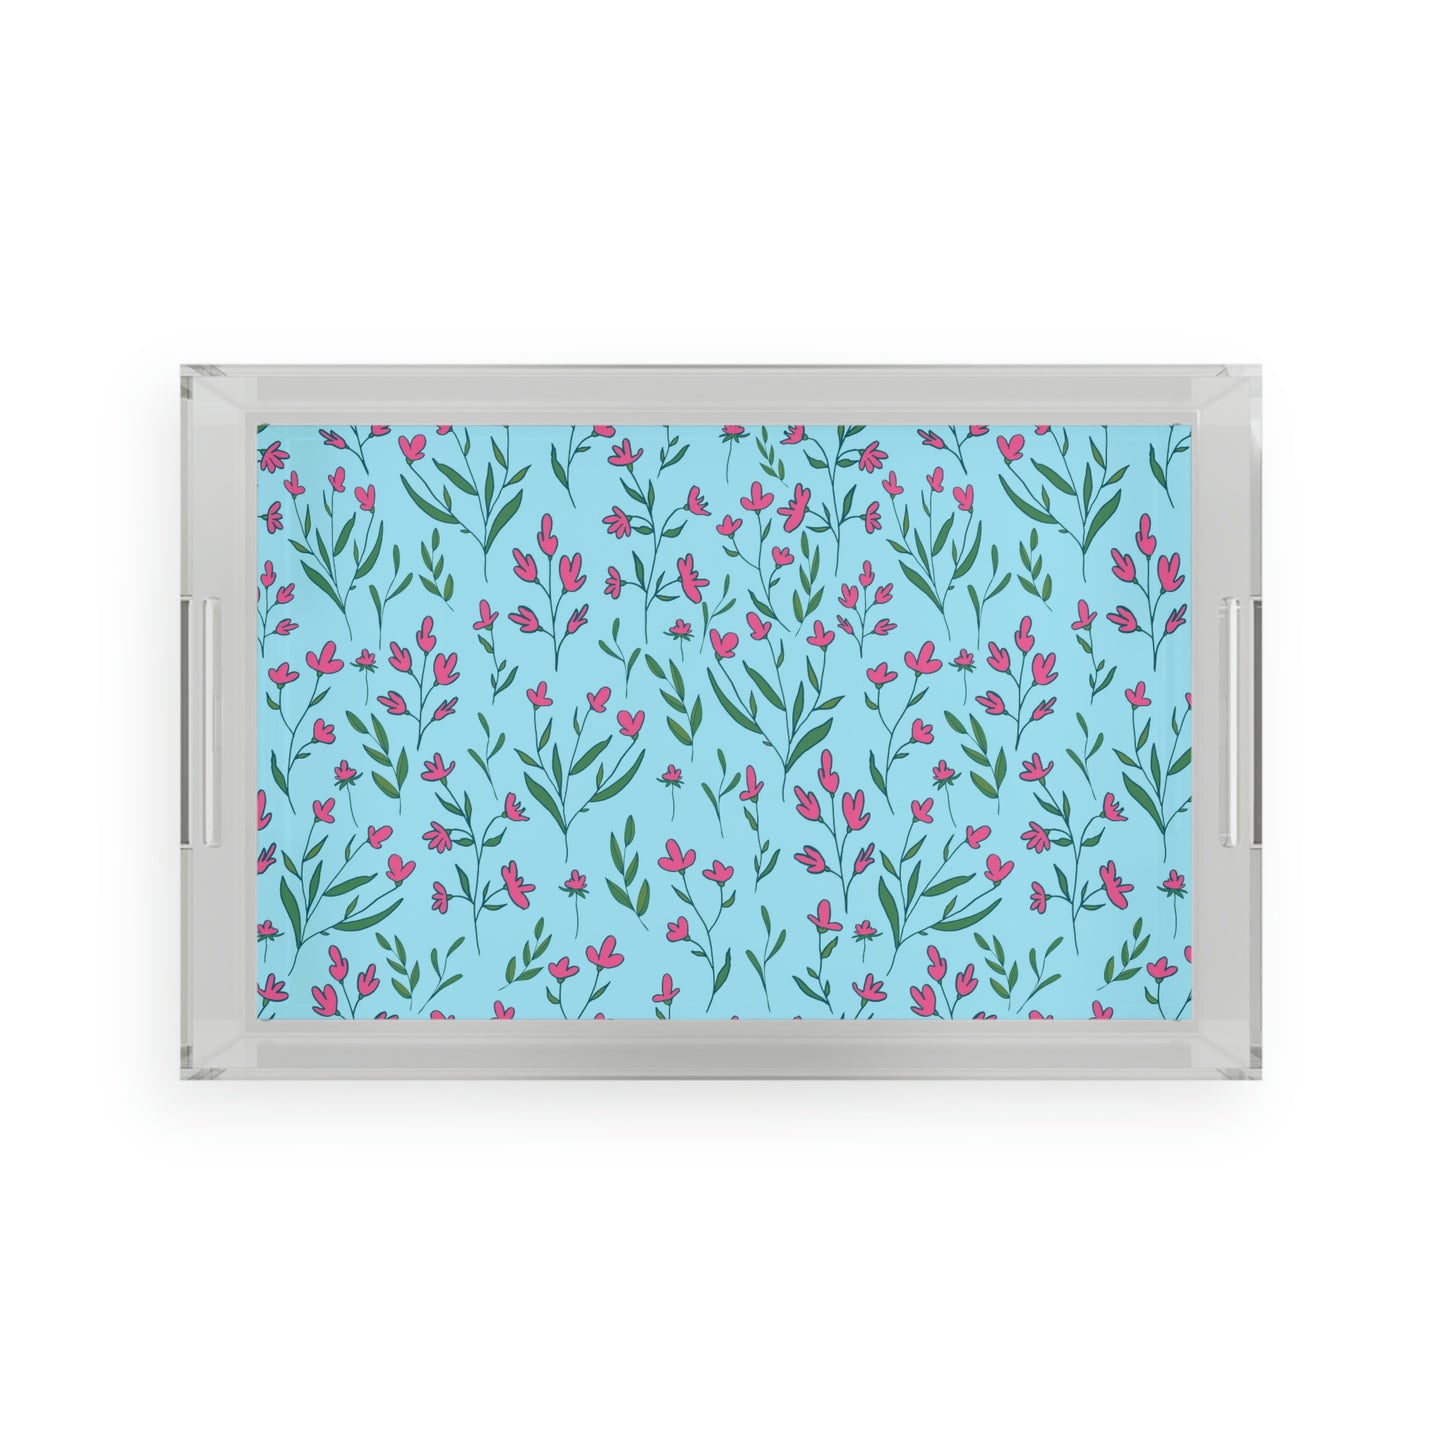 Bright Pink Flowers Acrylic Serving Tray